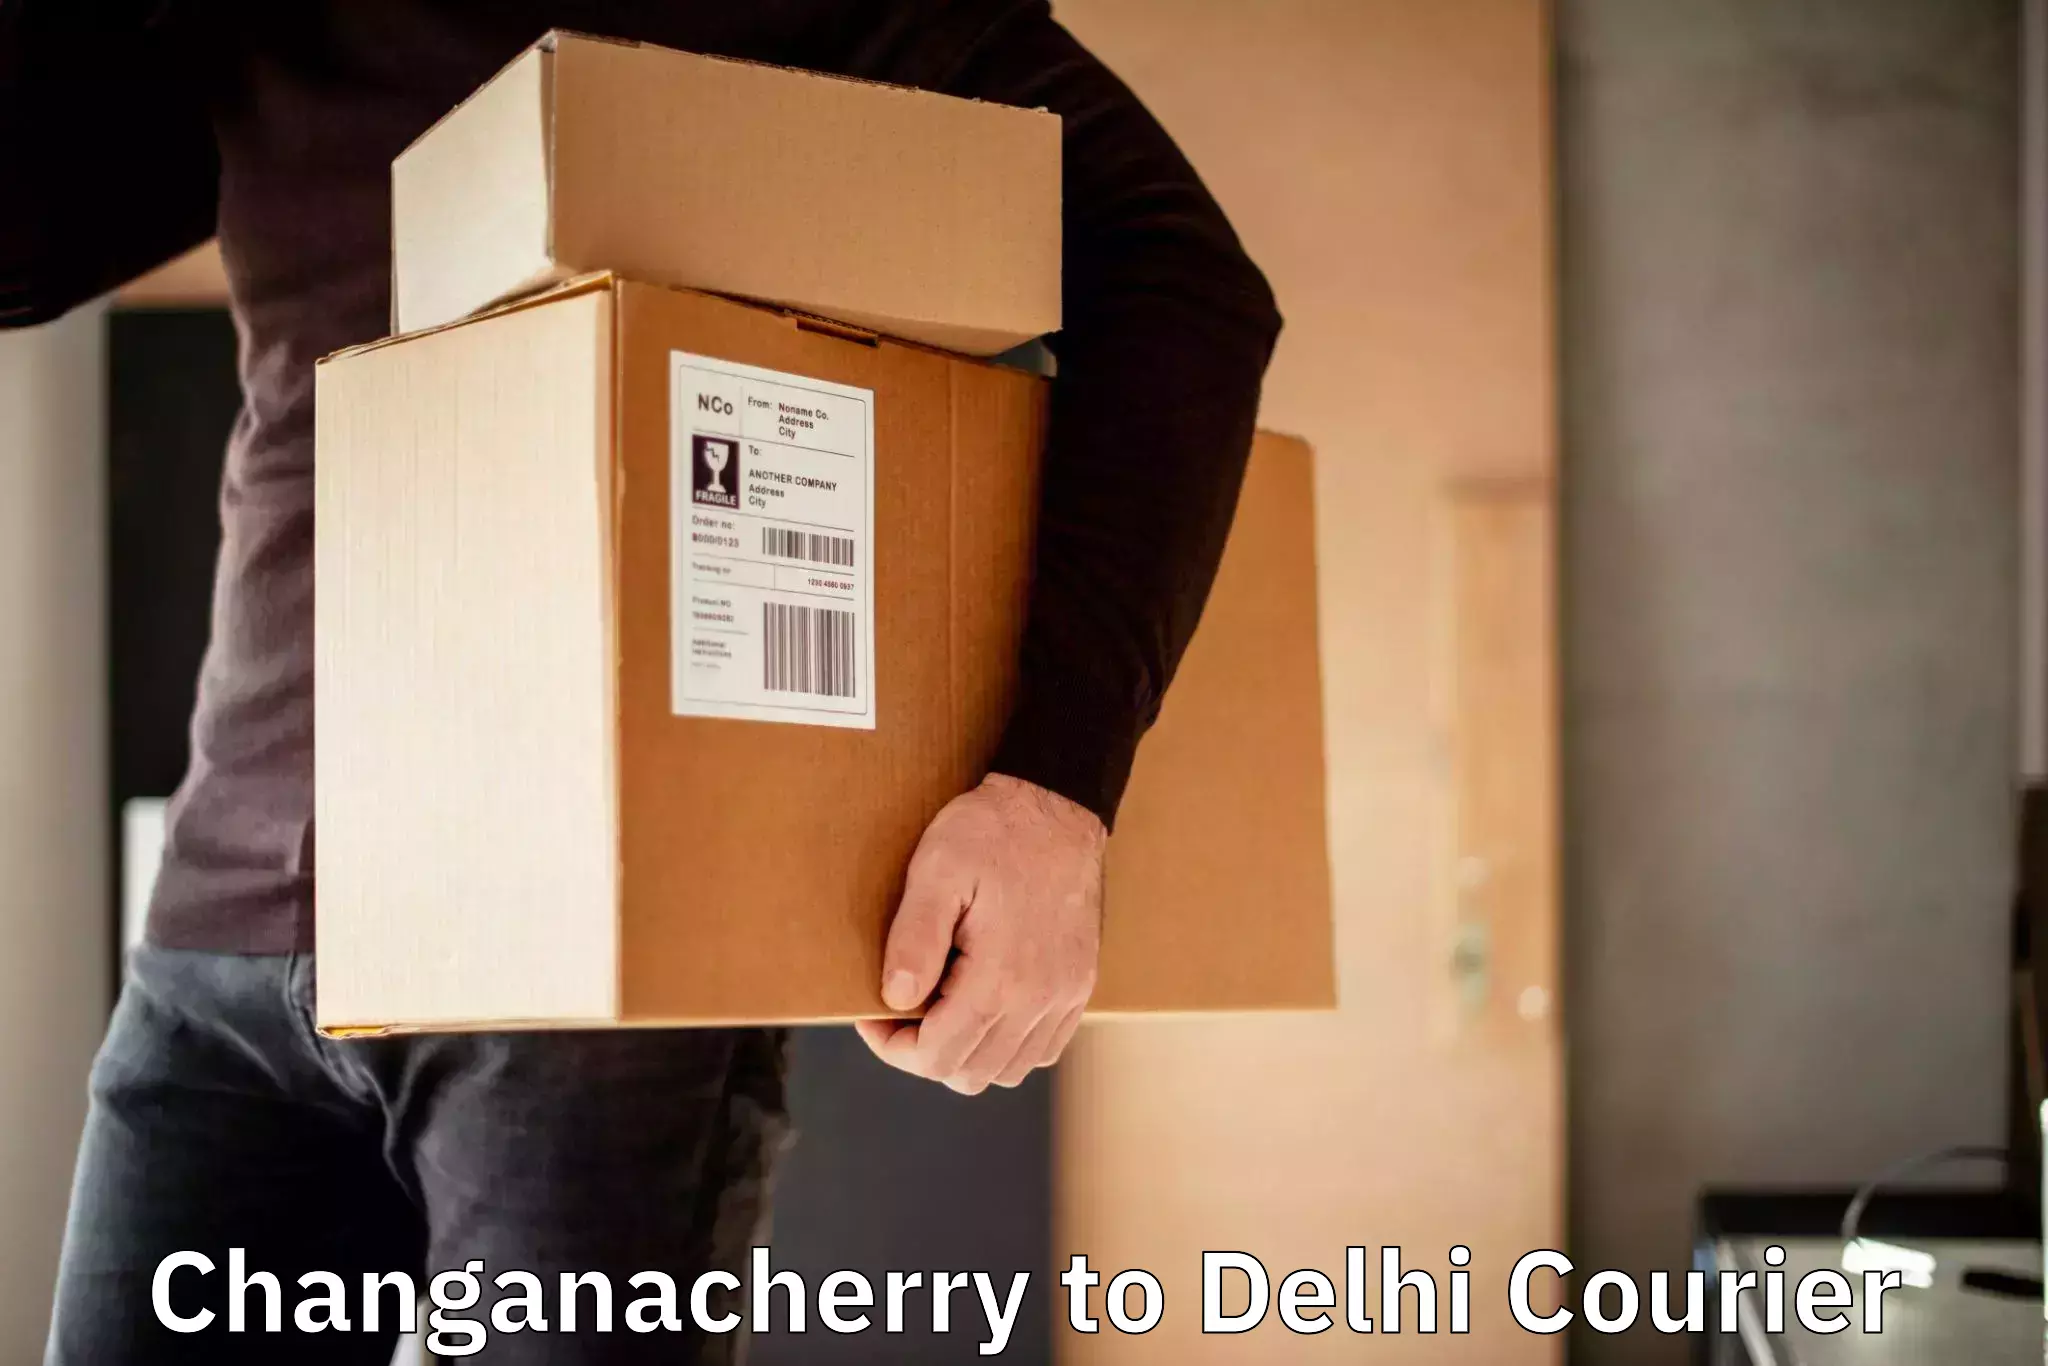 State-of-the-art courier technology Changanacherry to NCR